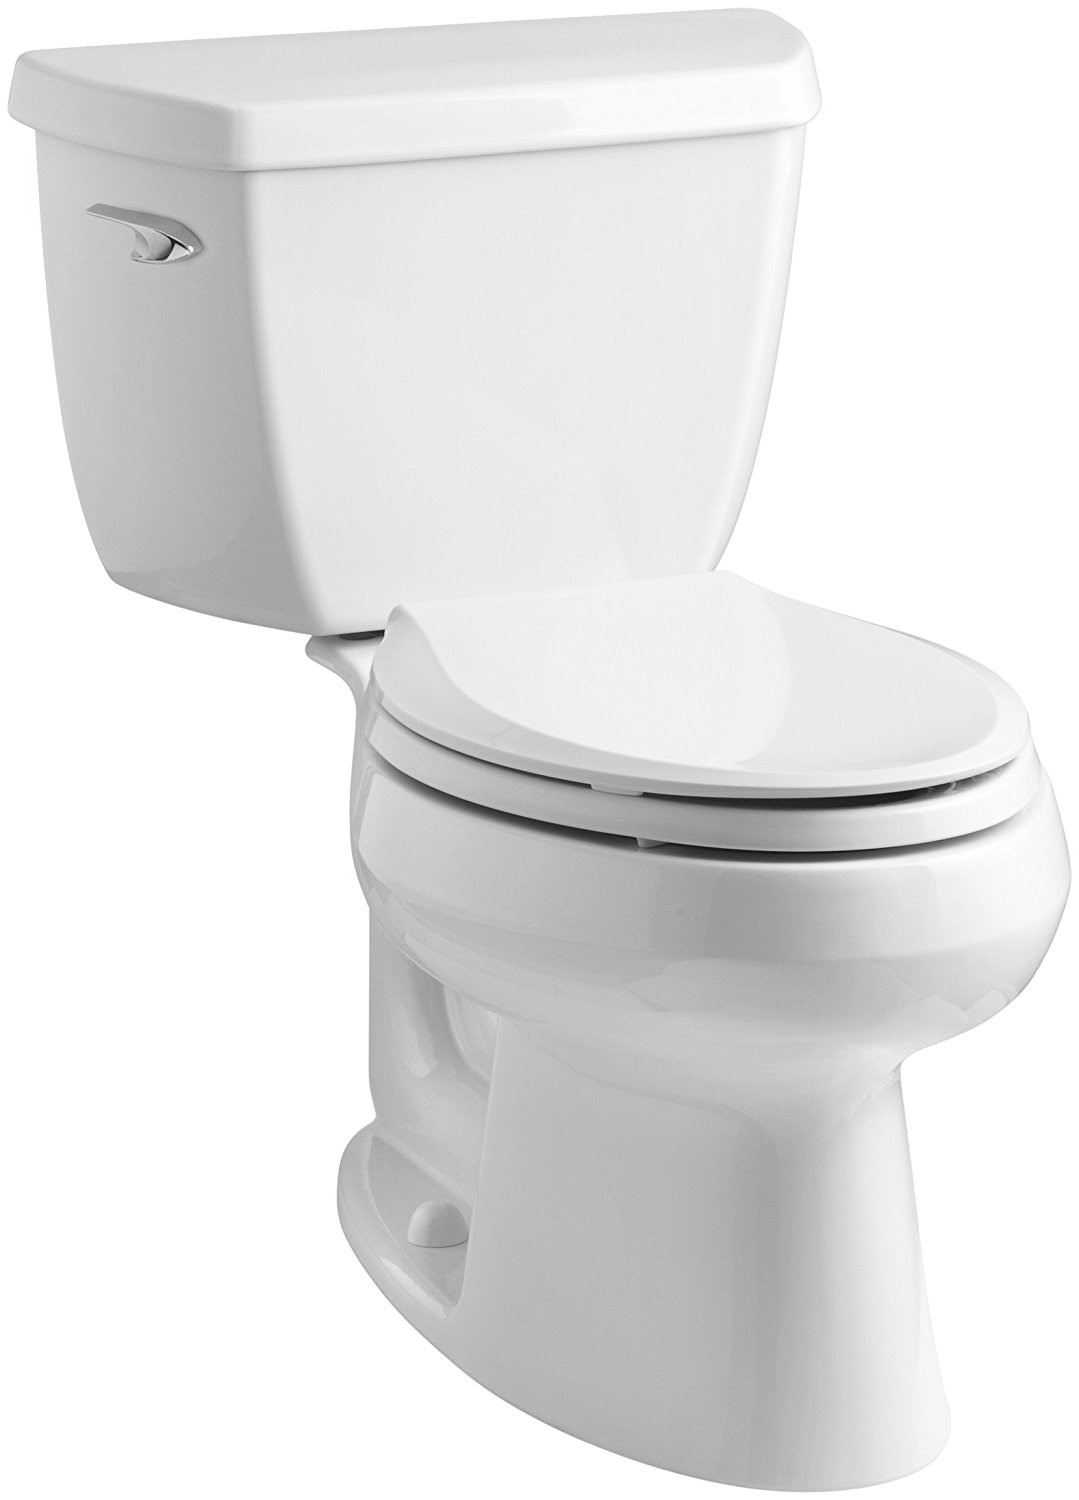 Kohler K-3575-0 Wellworth Classic 1.28 gpf Elongated Toilet with Class Five Flushing Technology and Left-Hand Trip Lever, White